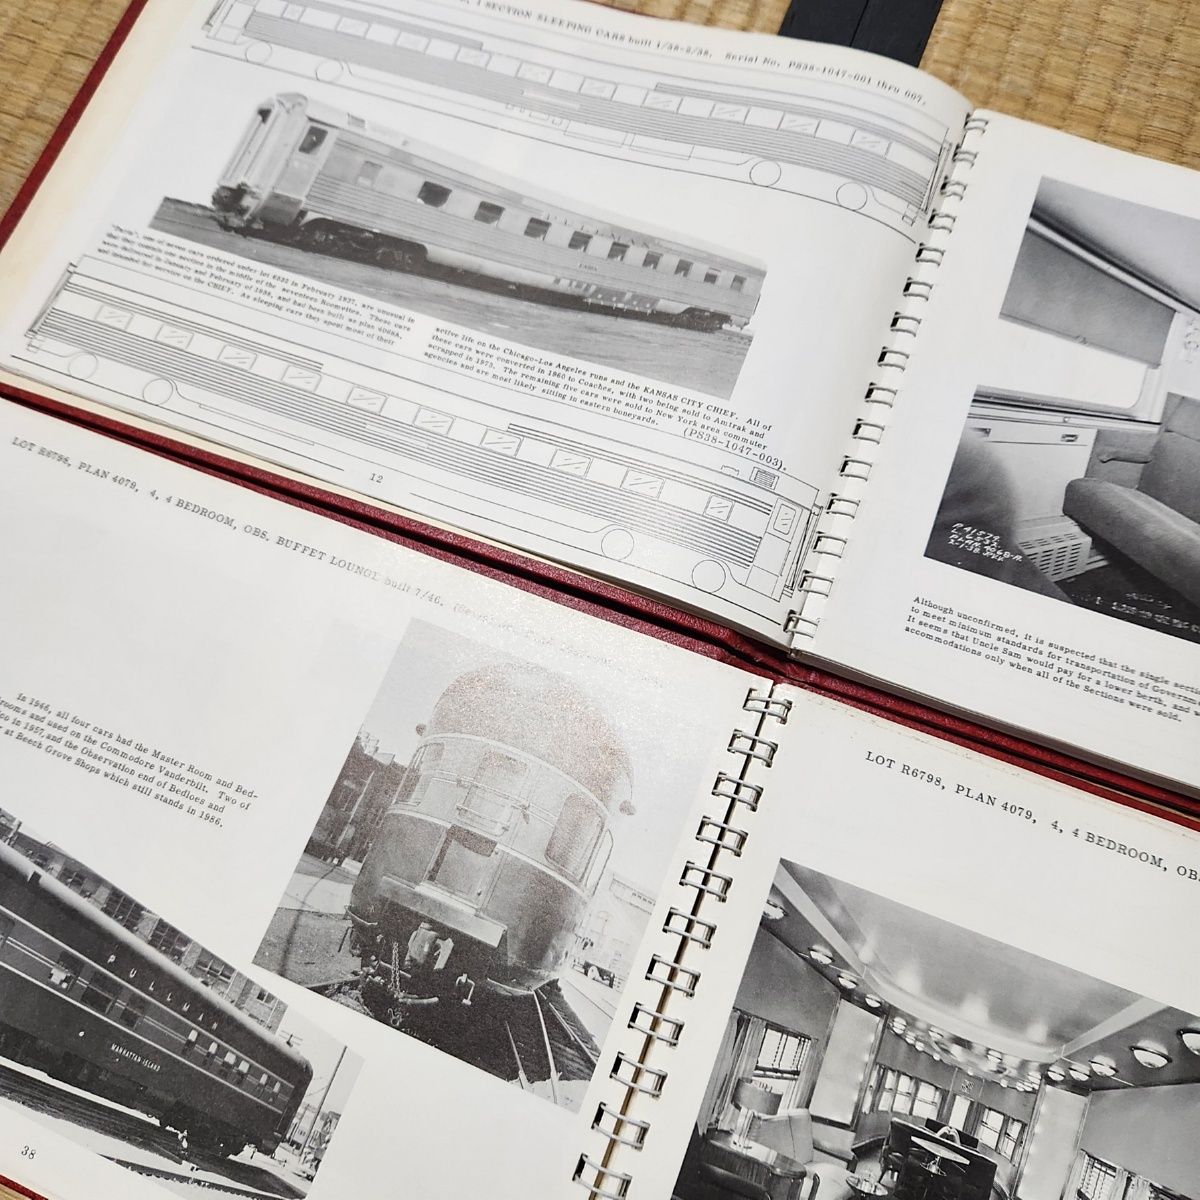 THE OFFICAL PULLMAN-STANDARD Vol.1～6 サンタフェ　ニューヨークセントラル サザンパシフィック等 洋書 鉄道 100s23-4595_画像4